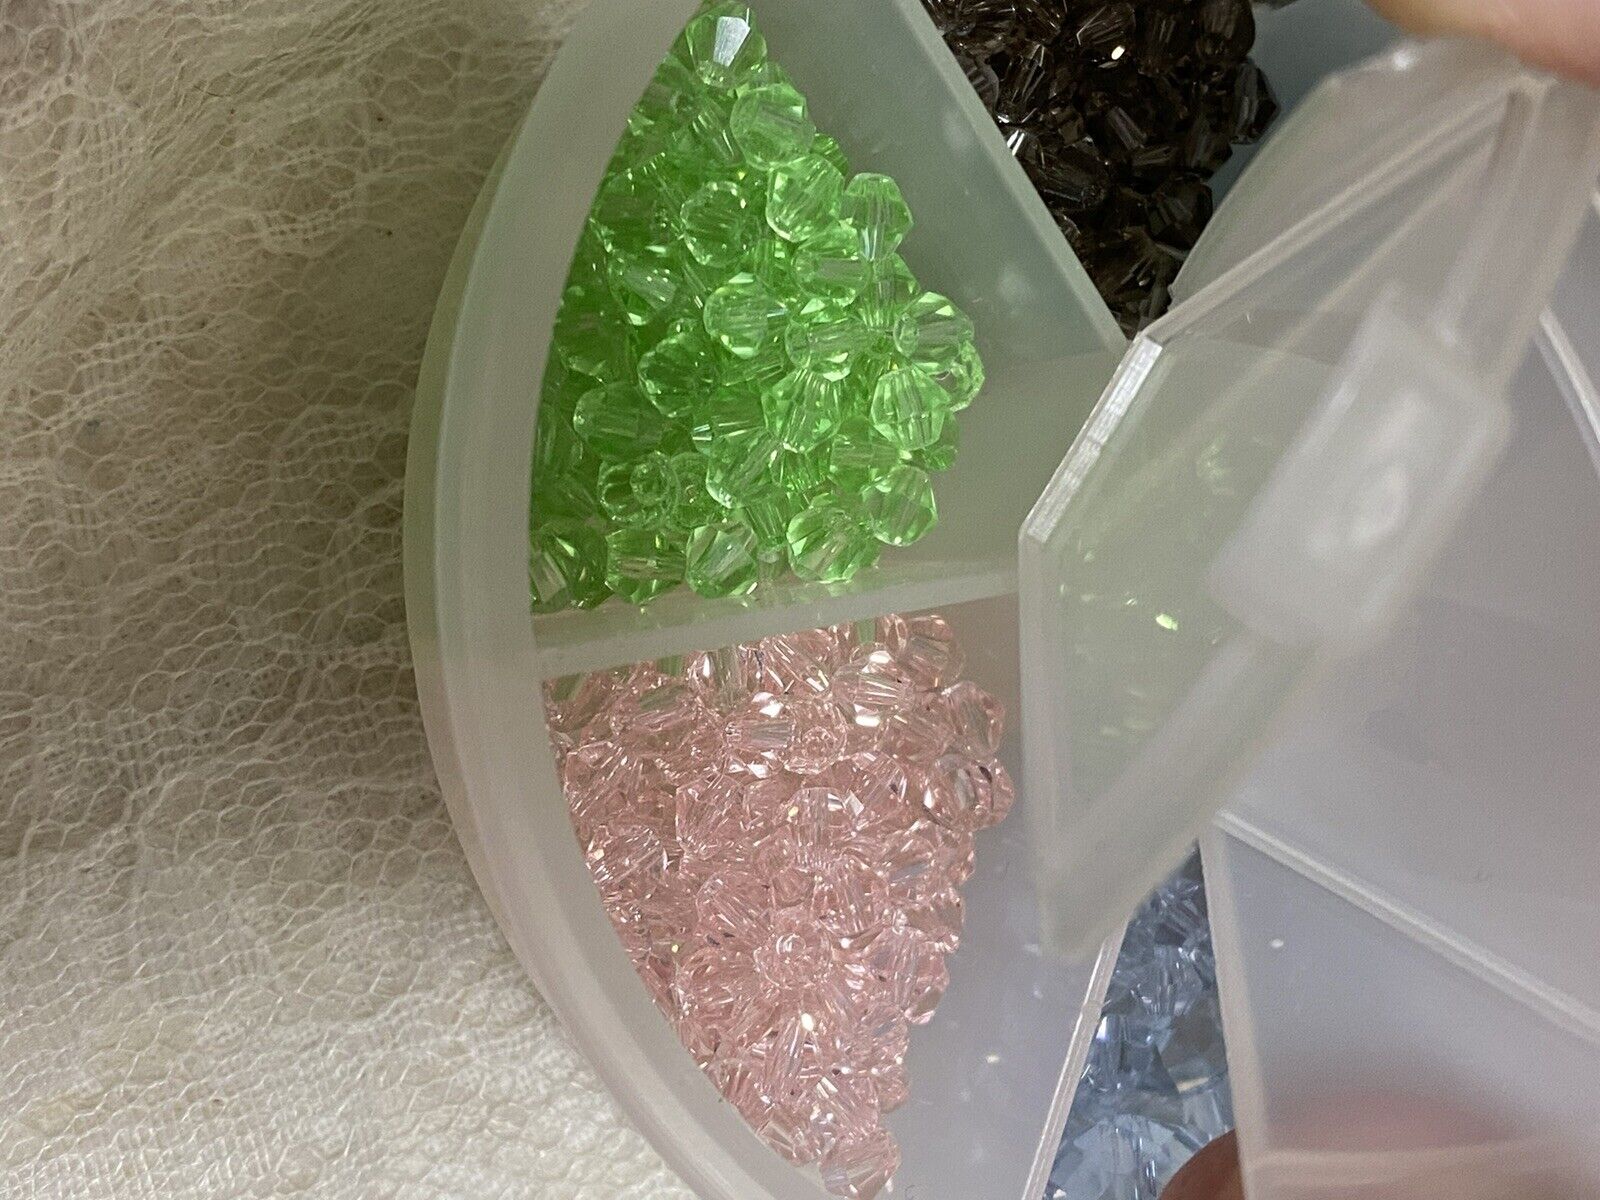 NEW Swarovski Scatter Crystals  Assorted VARIED COLORS With Aurora Borealis